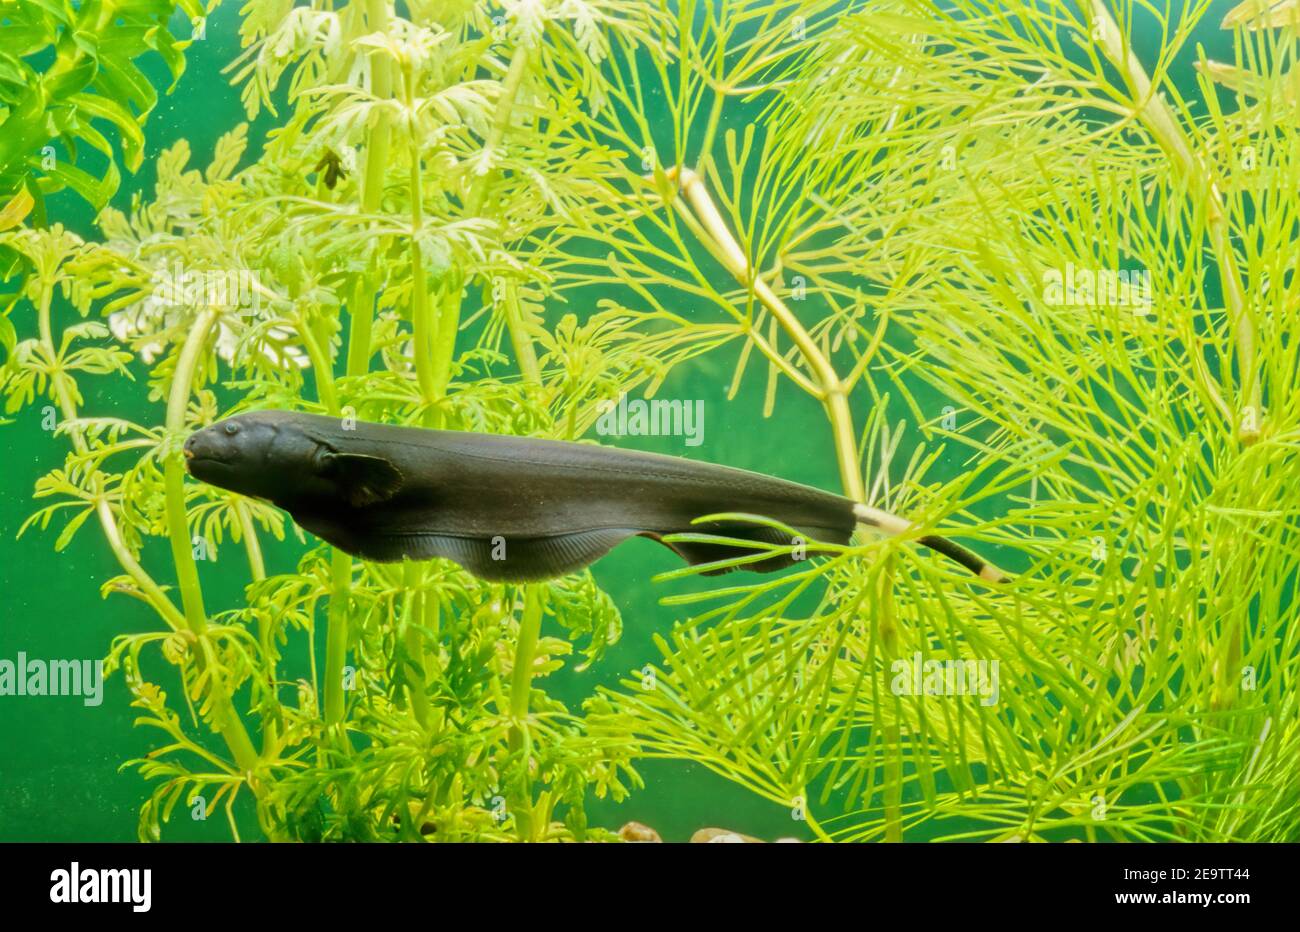 The black ghost knifefish (Apteronotus albifrons) is a tropical fish belonging to the ghost knifefish family (Apteronotidae). Stock Photo